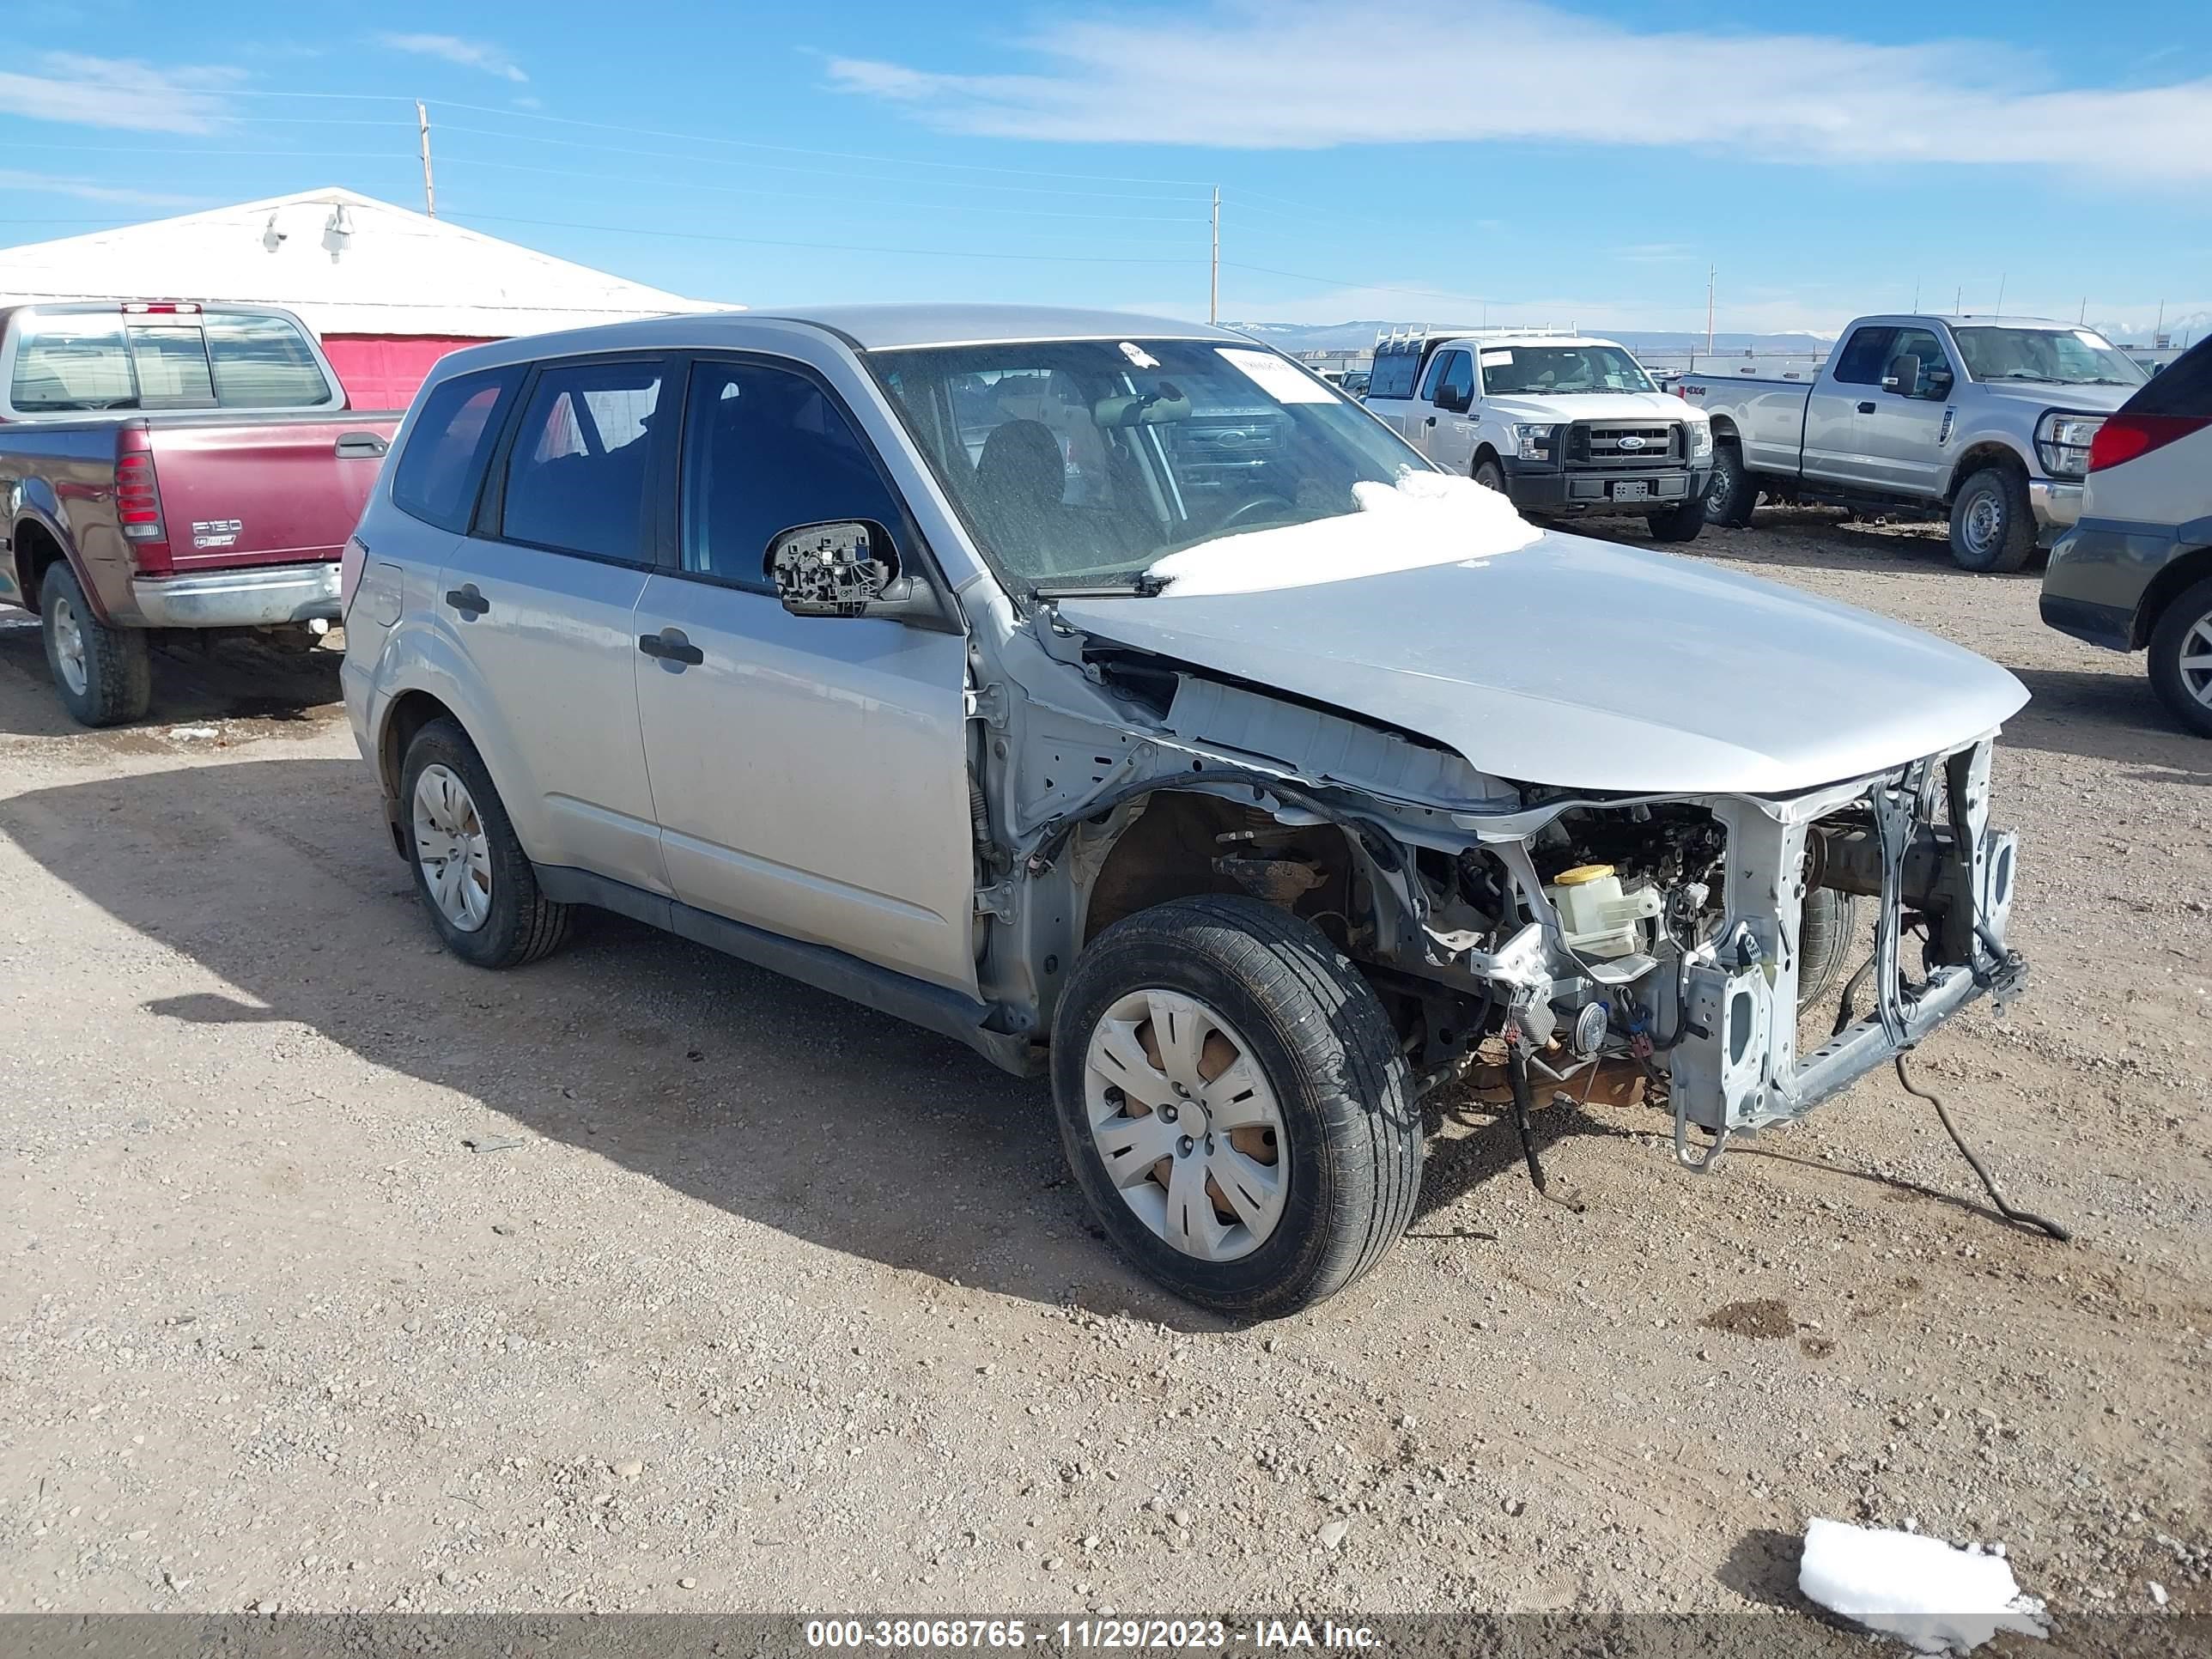 vin: JF2SH61649H731599 JF2SH61649H731599 2009 subaru forester 2500 for Sale in 81416, 1280 Highway 50, Delta, USA